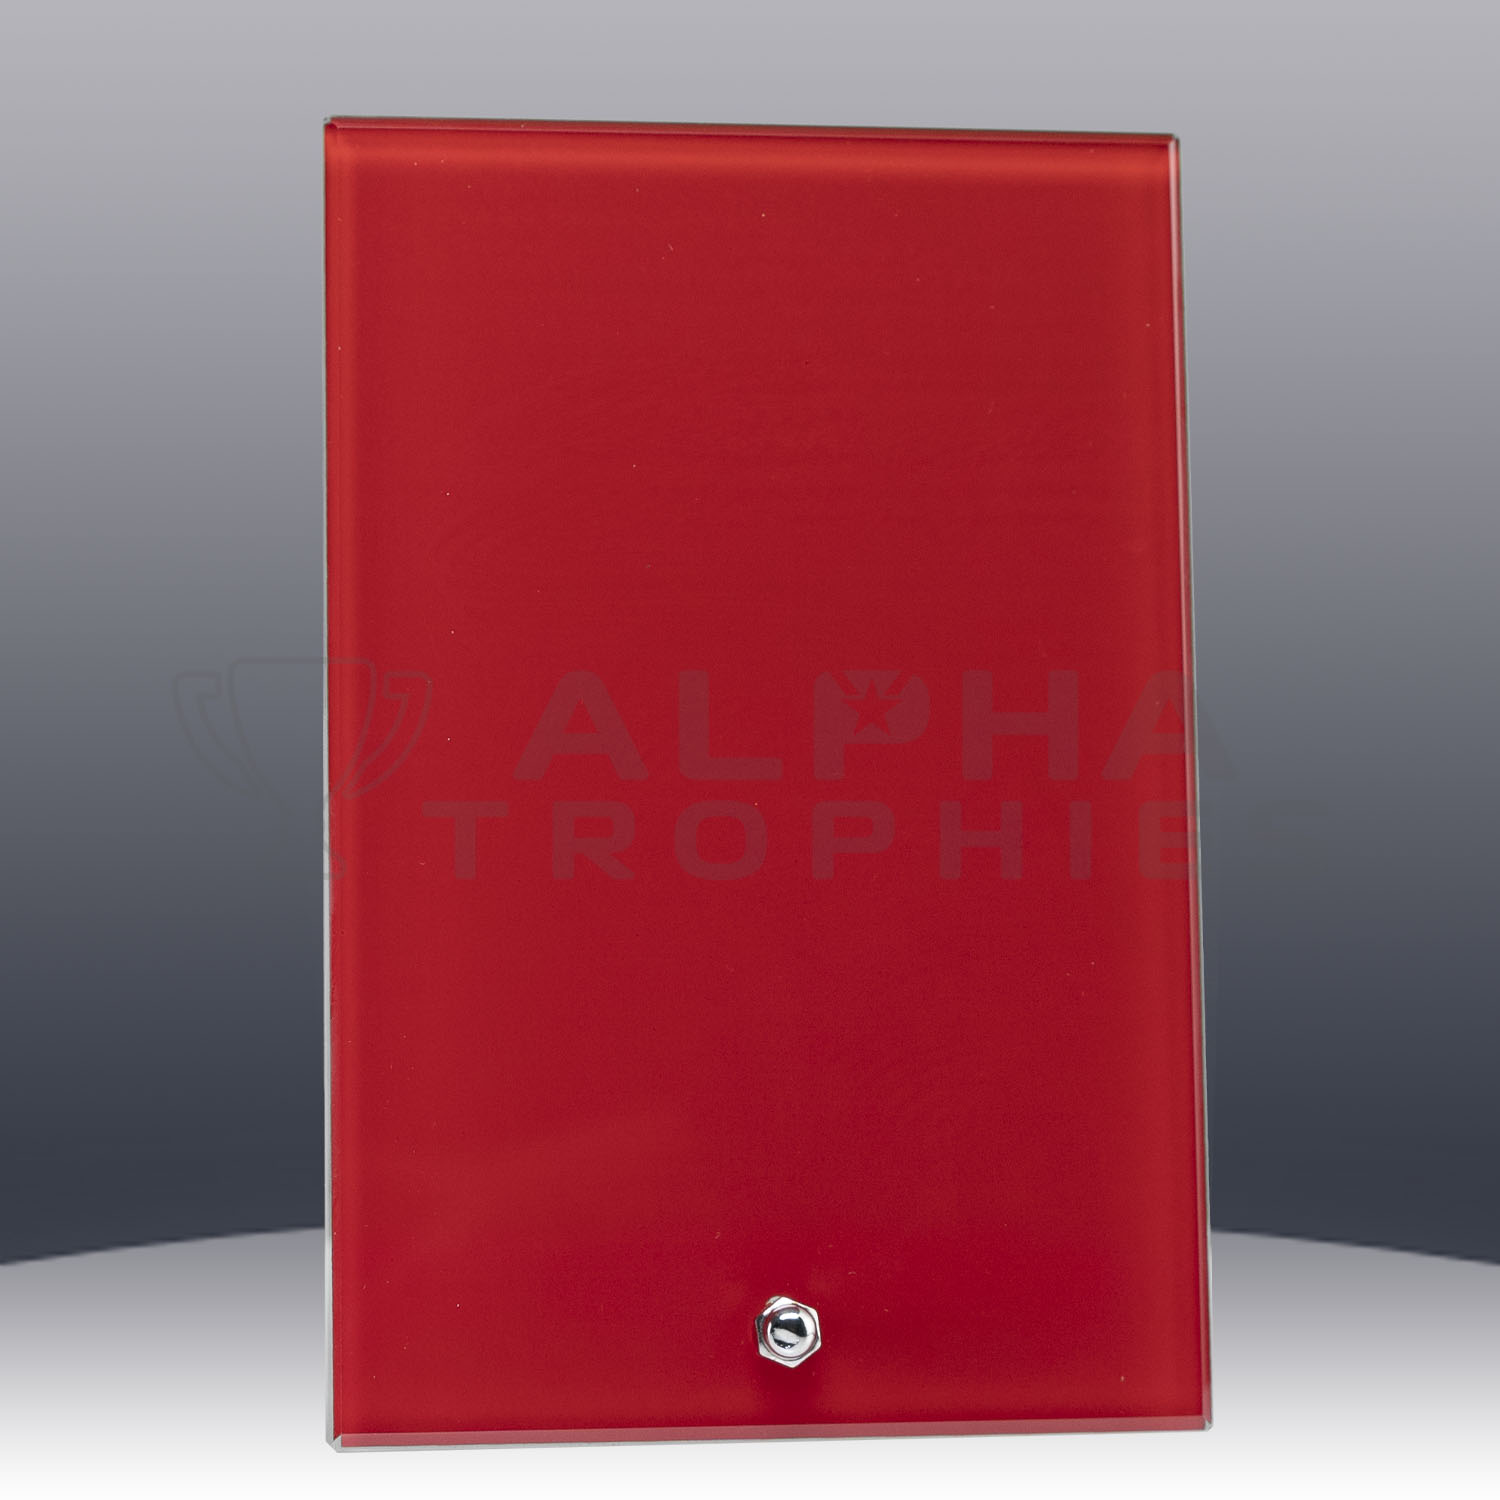 laser-glass-rectangle-red-1268-1r-front